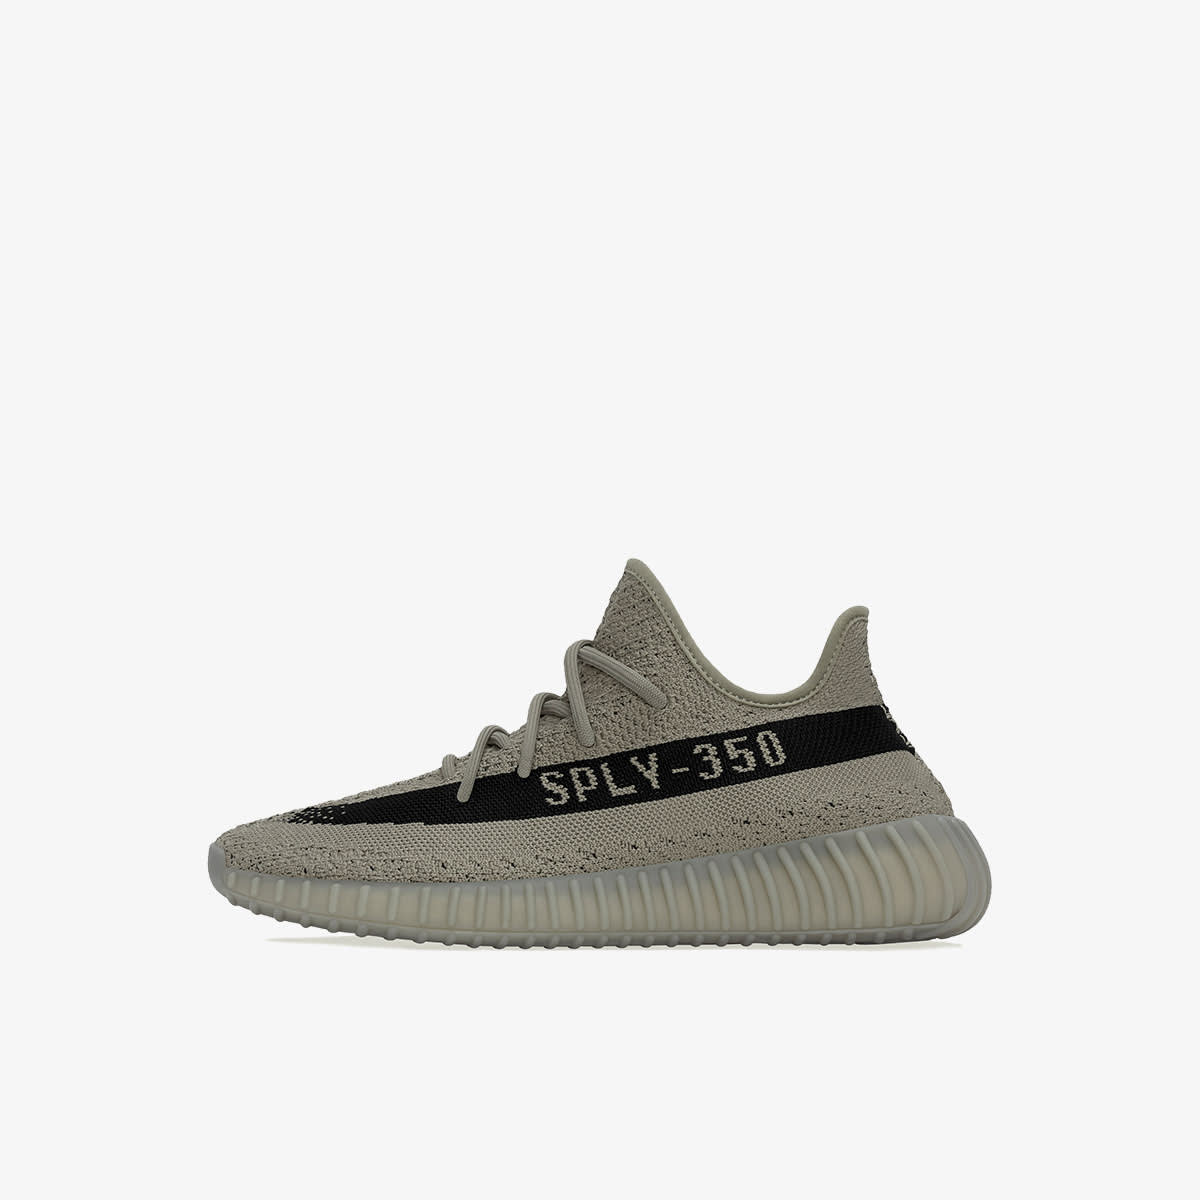 Yeezy Boost 350v2 (Granite Core Black) | END. Launches